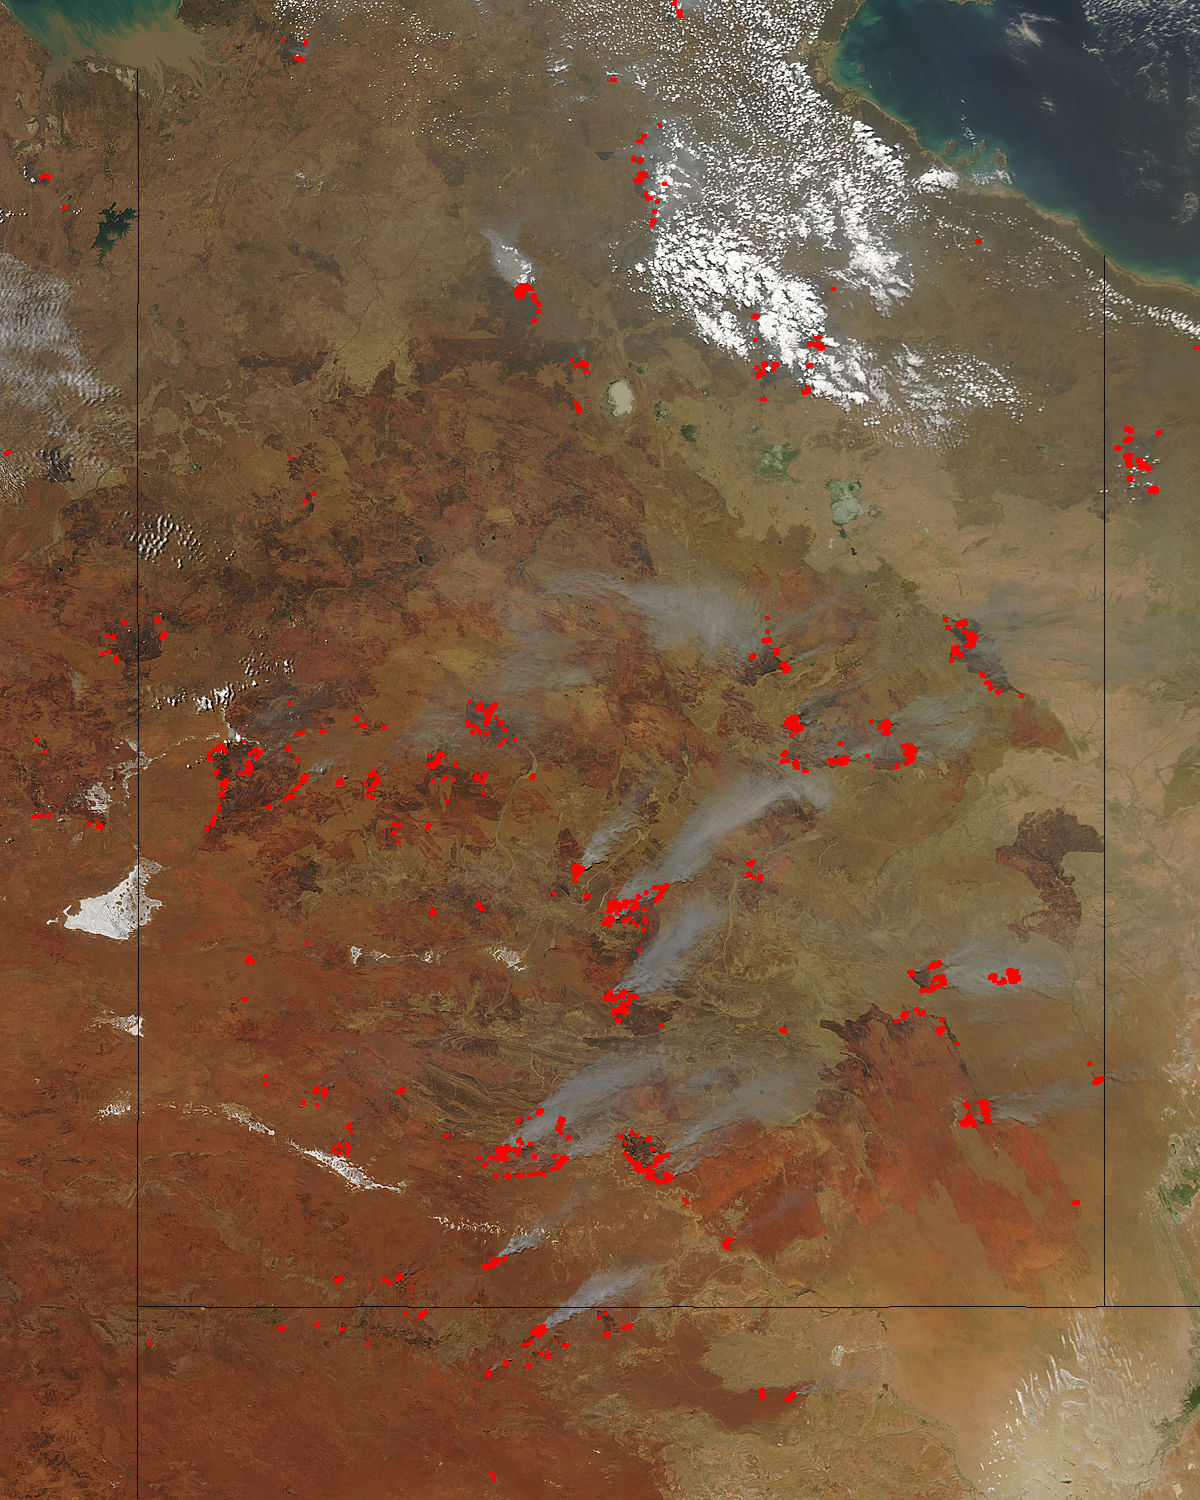 large-fires-burned-throughout-australia%e2%80%99s-northern-territory